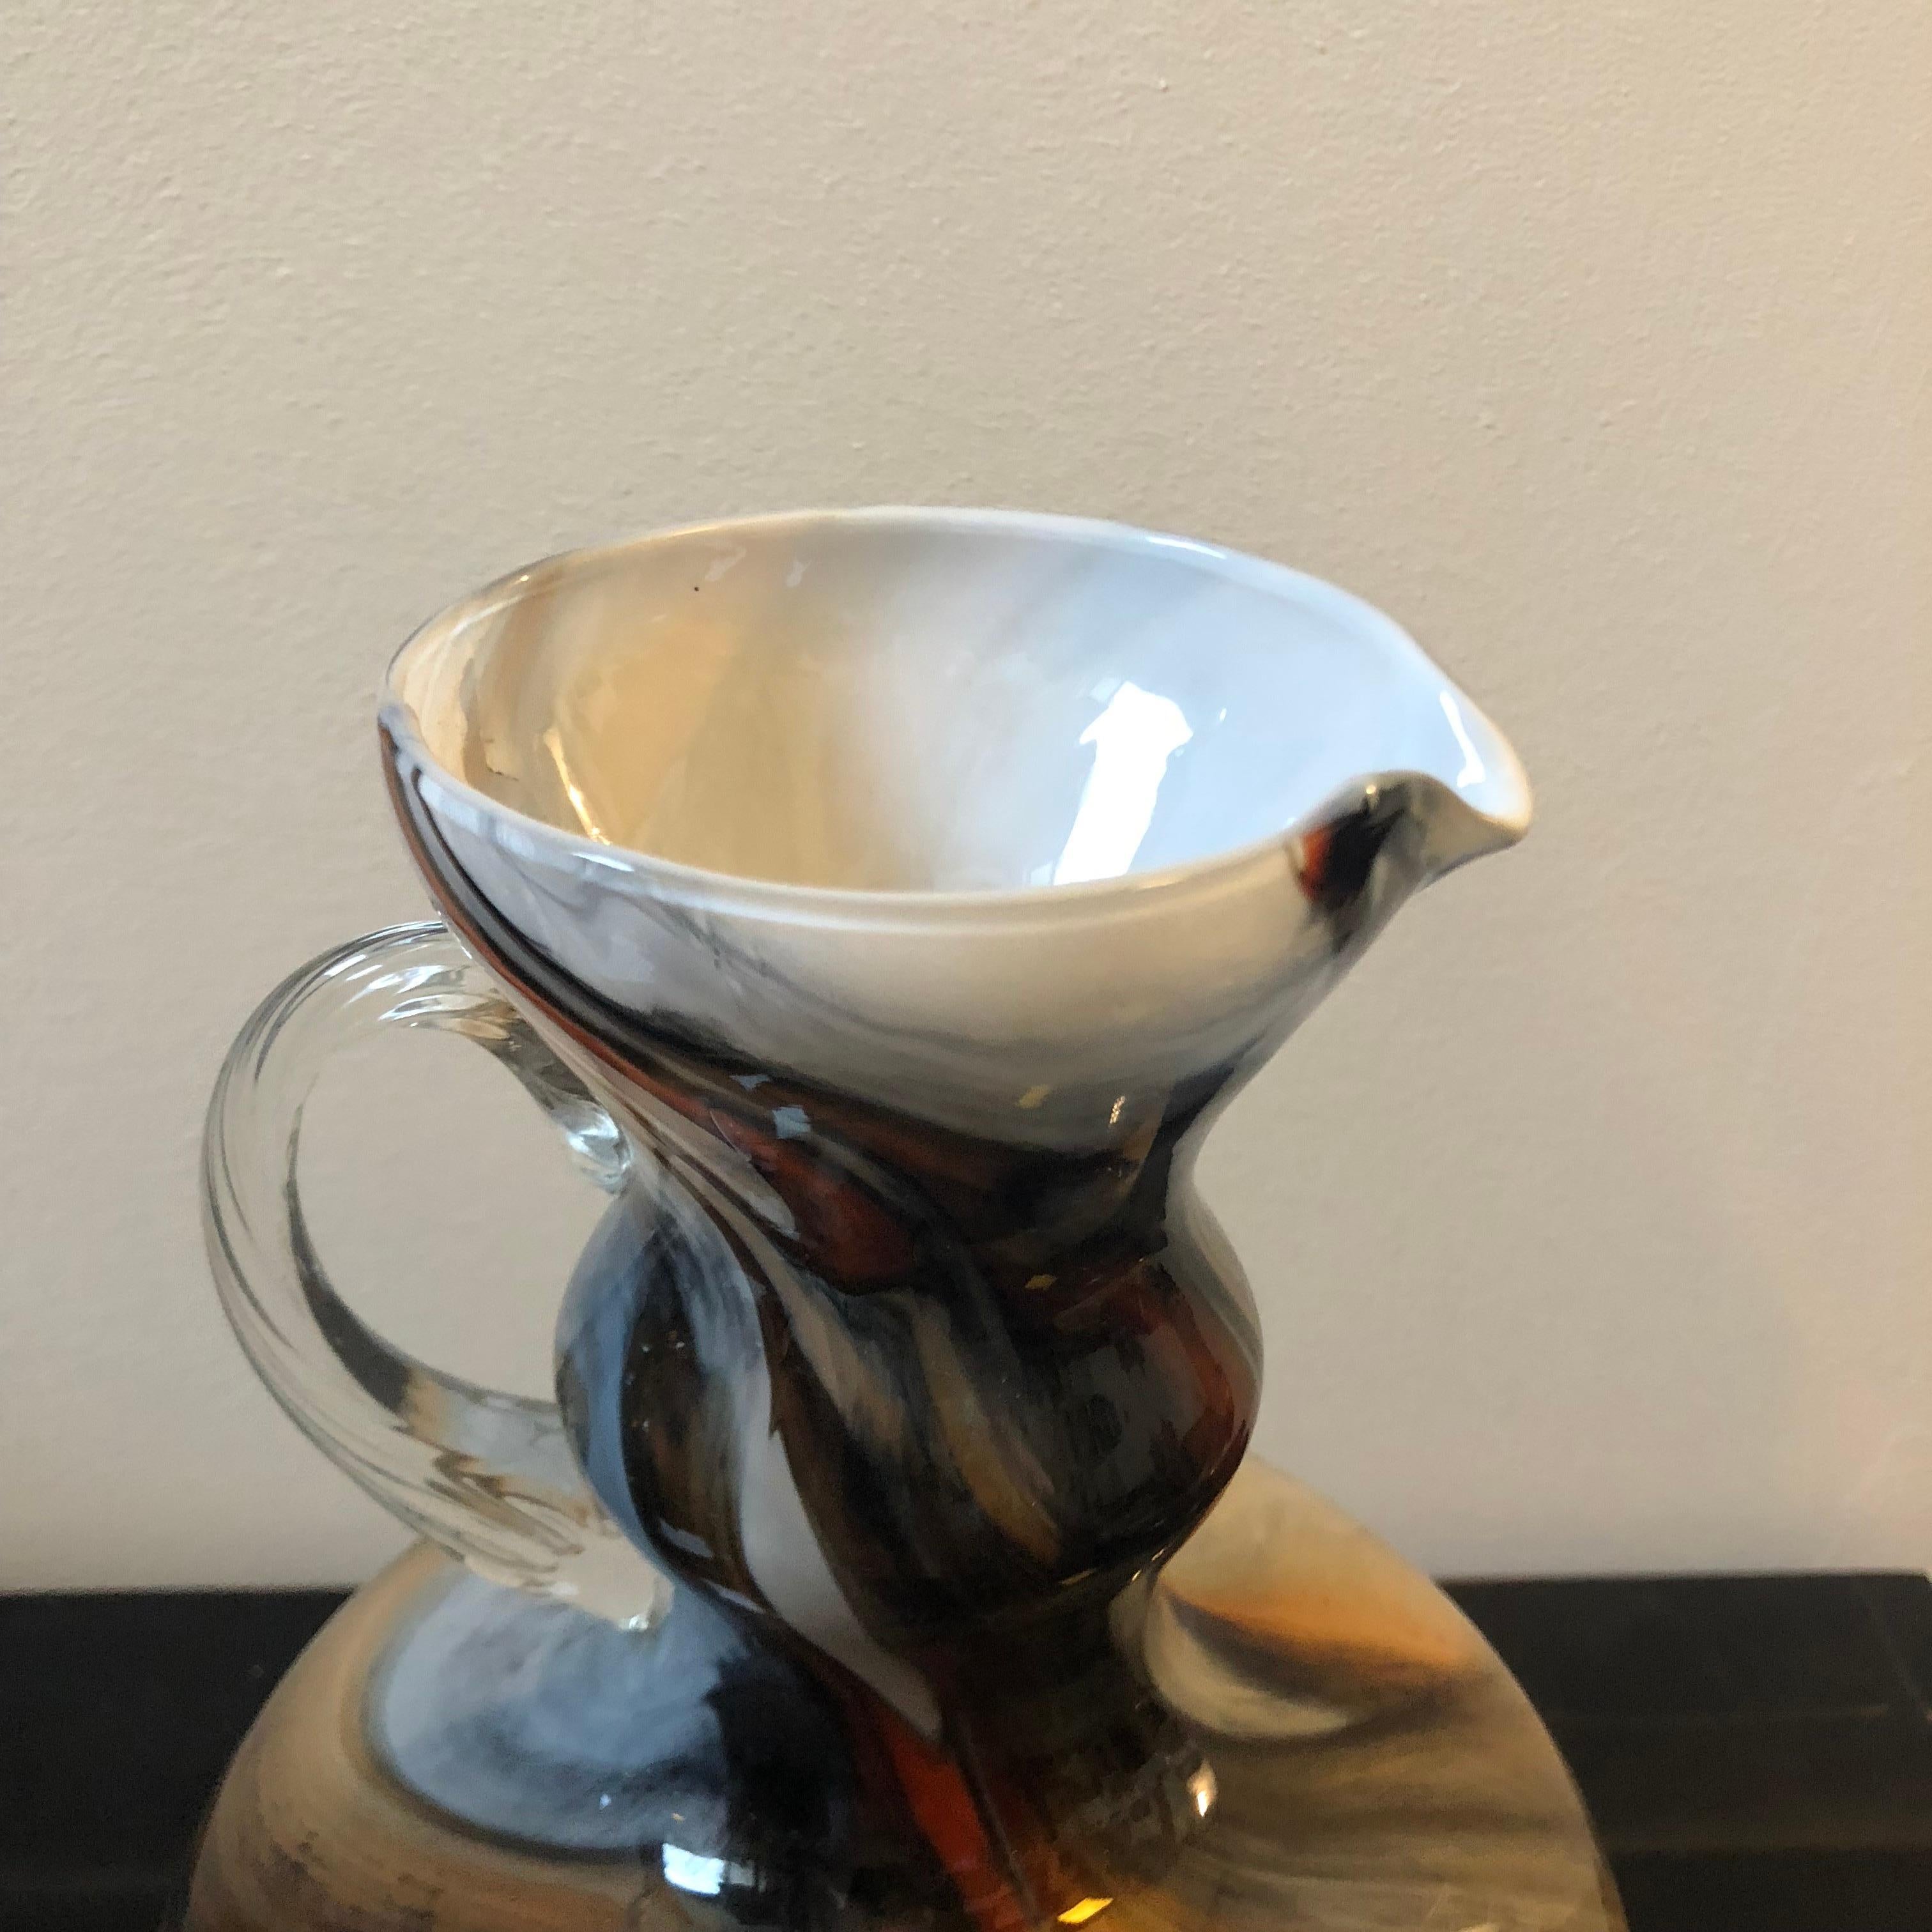 A brown and red opaline Murano glass jug by Carlo Moretti, made in Italy in 1970.